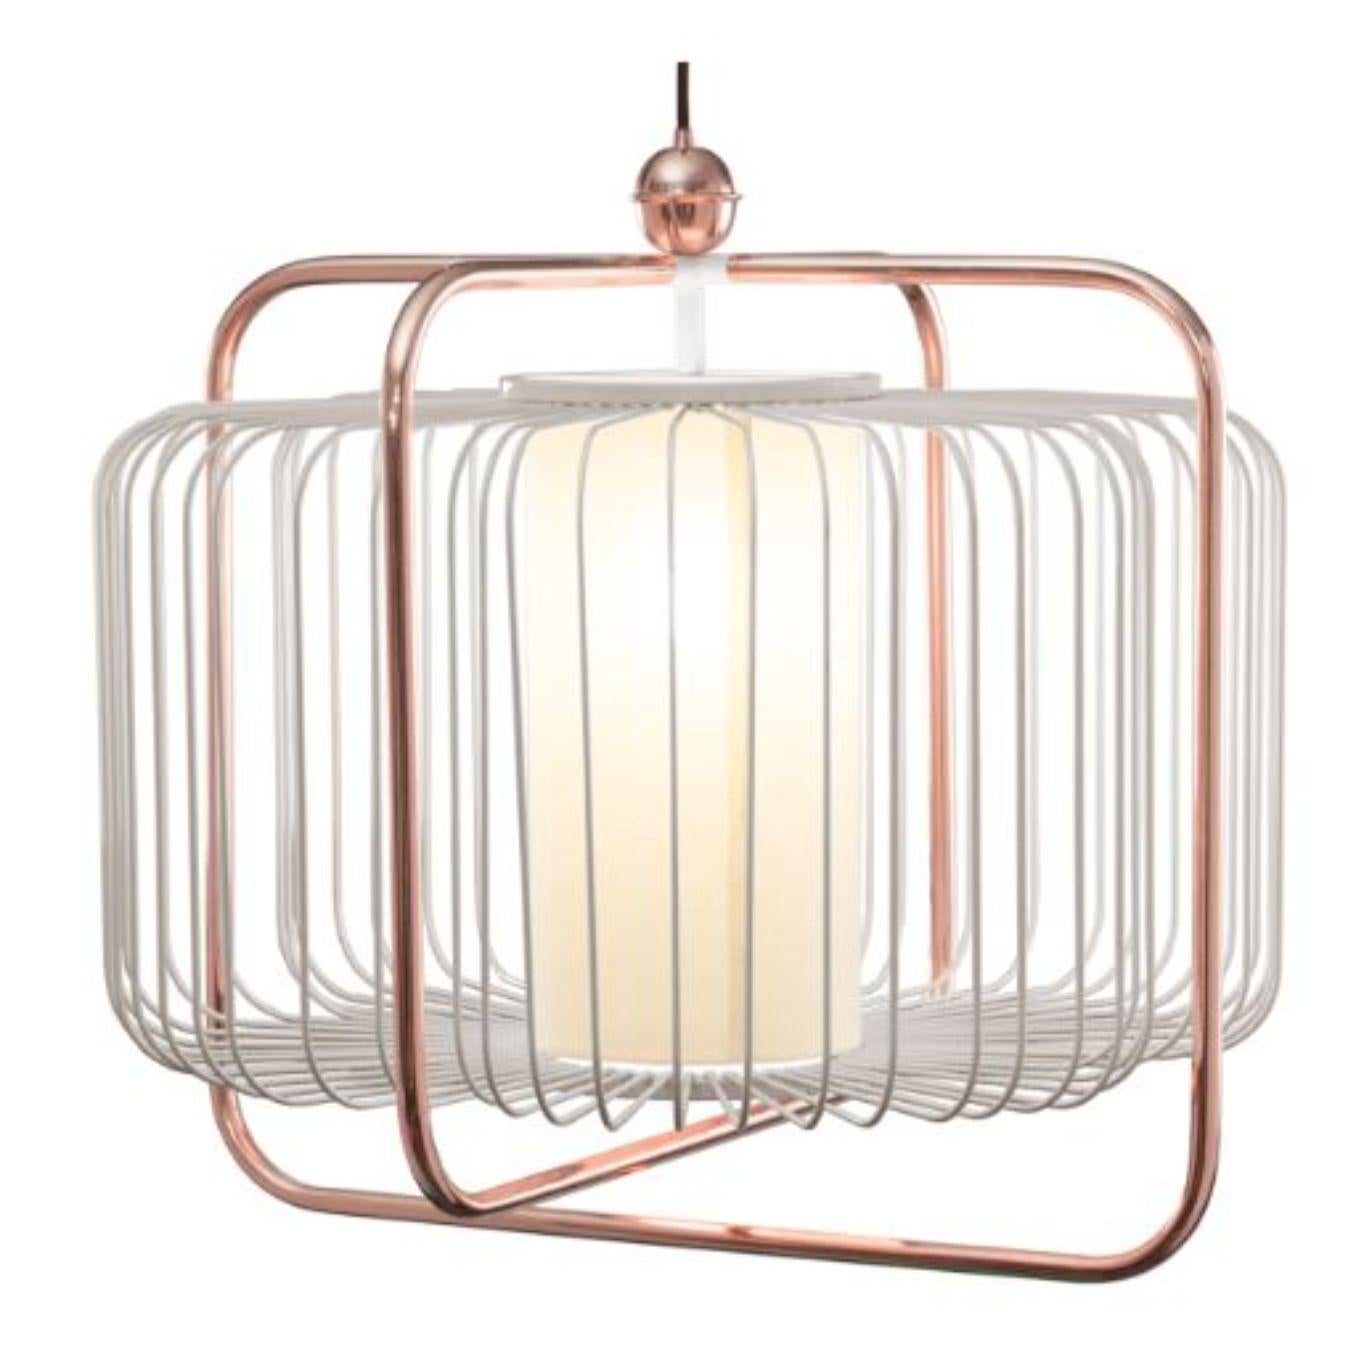 Copper and Taupe Jules I suspension lamp by Dooq
Dimensions: W 63 x D 63 x H 57 cm
Materials: lacquered metal, polished or brushed metal, copper.
abat-jour: cotton
Also available in different colors and